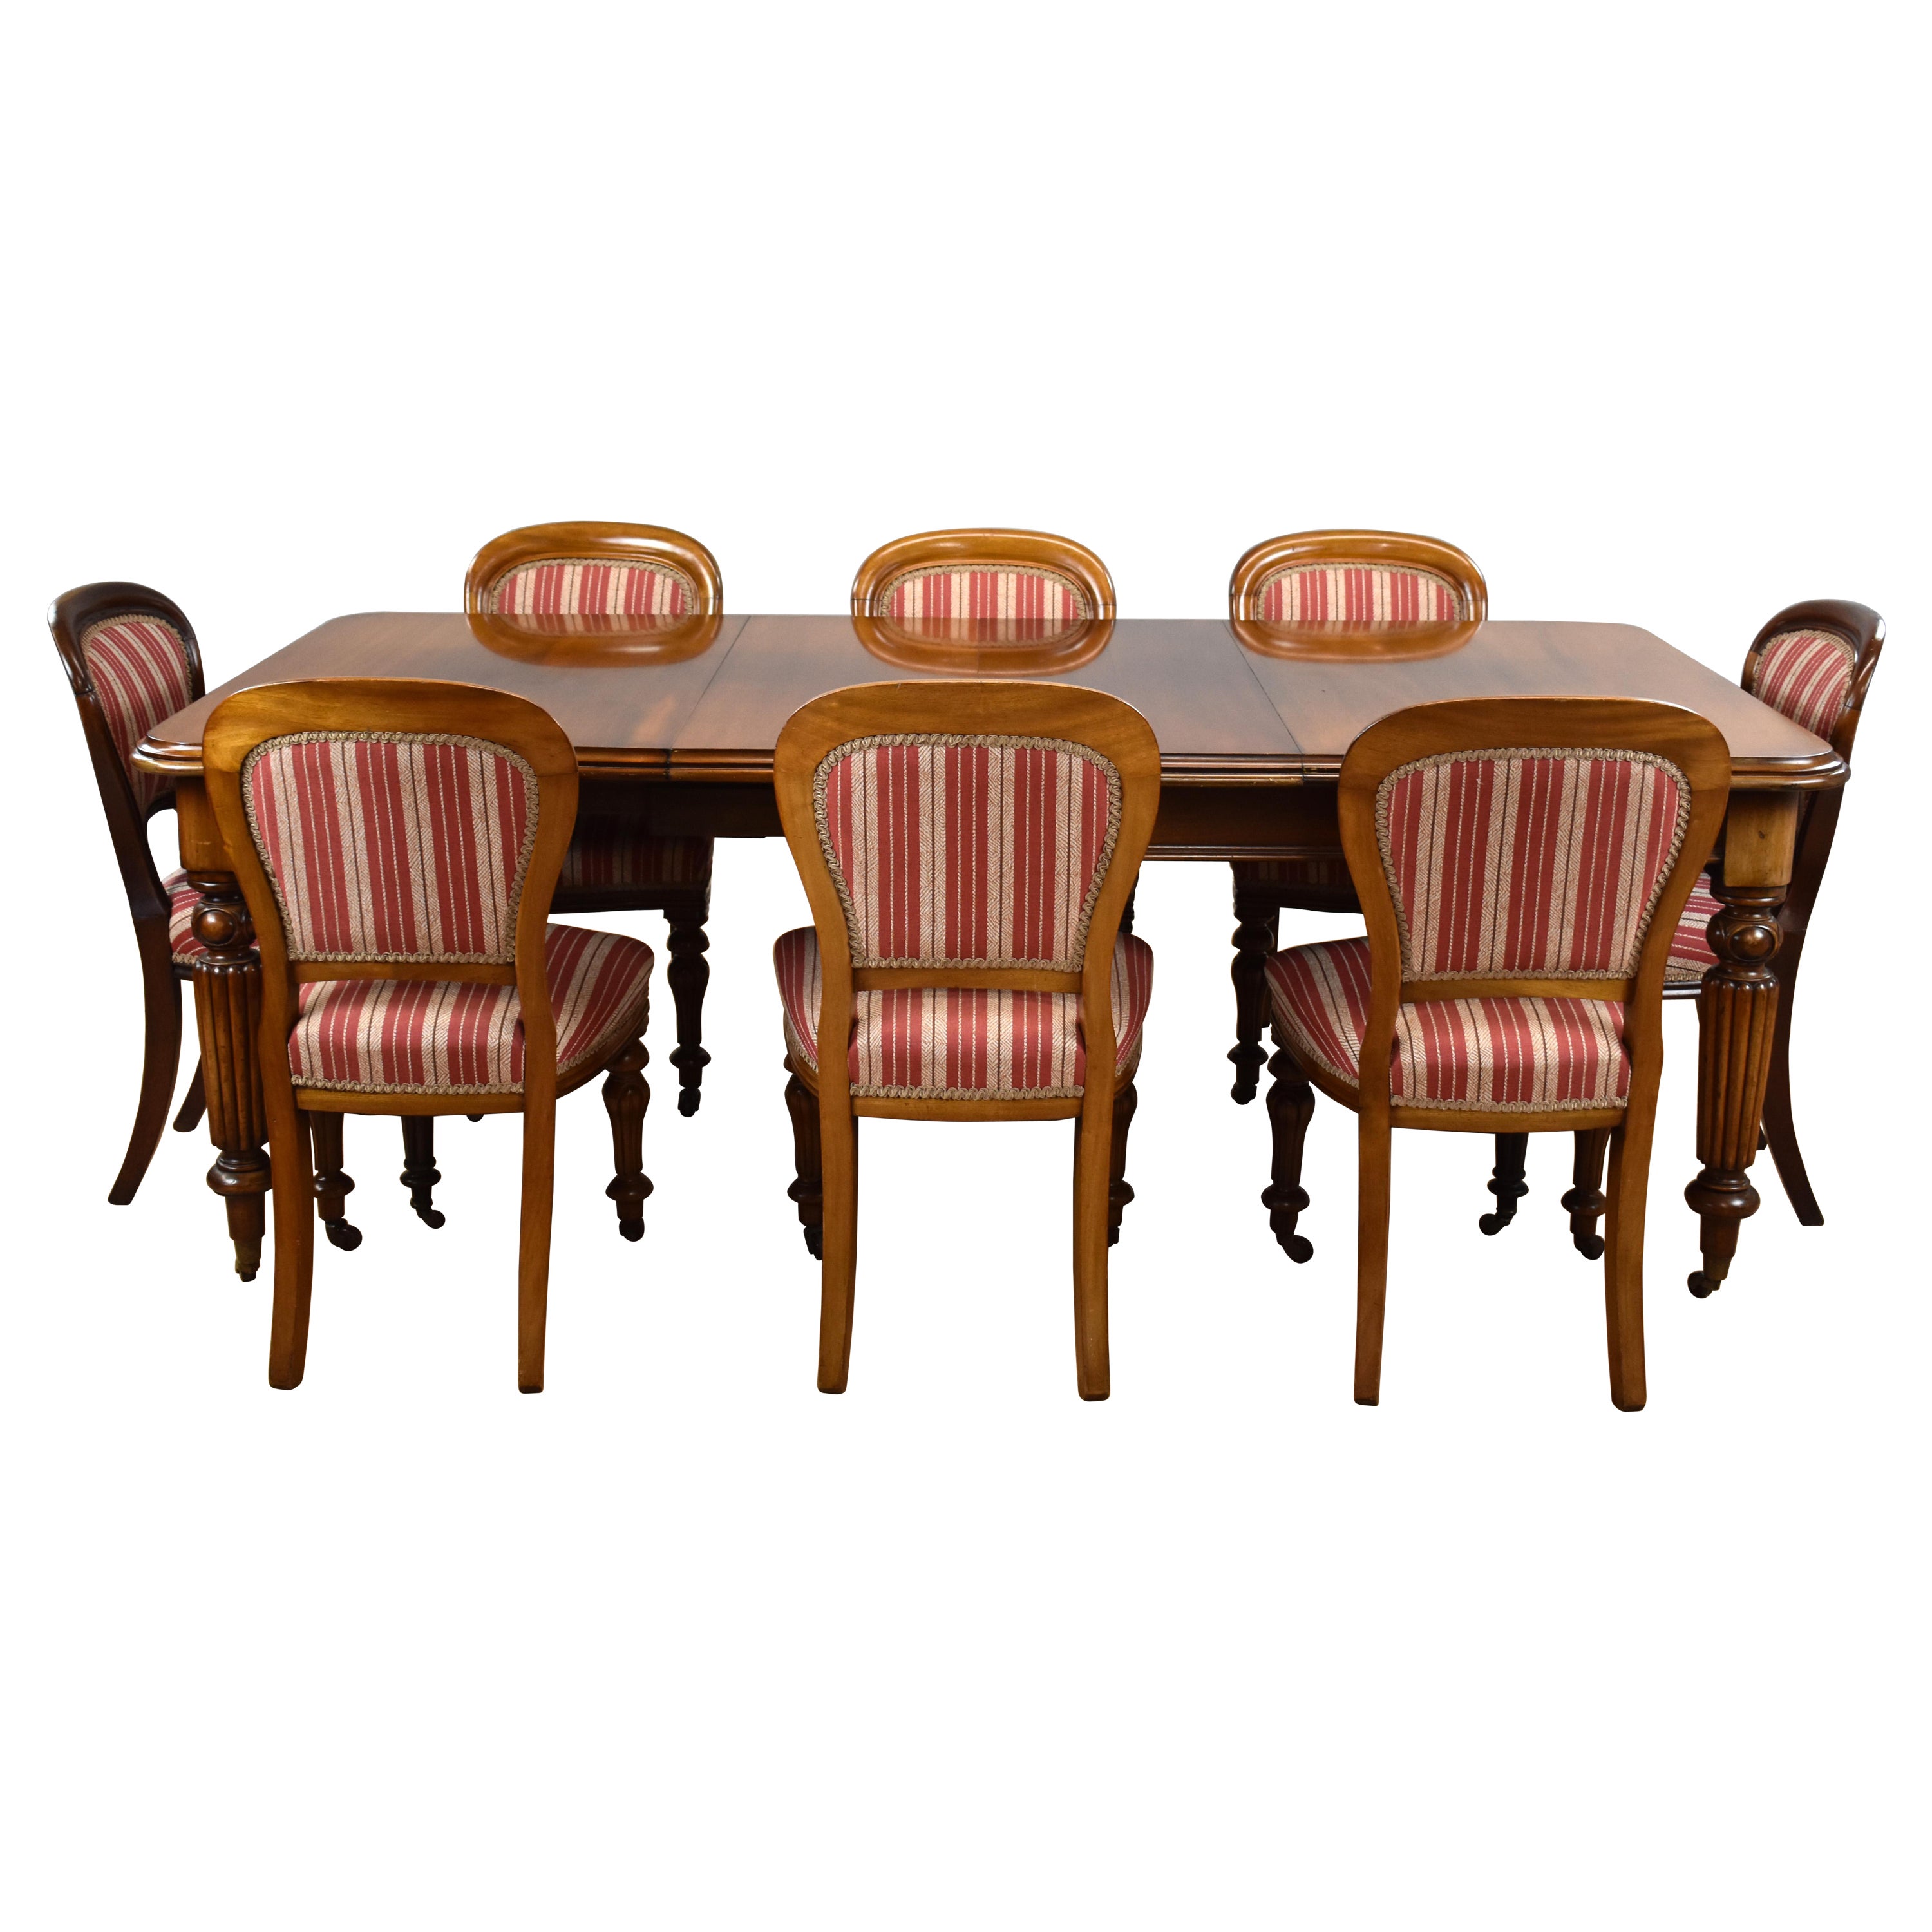 19th Century English Victorian Extending Dining Table & 10 Chairs